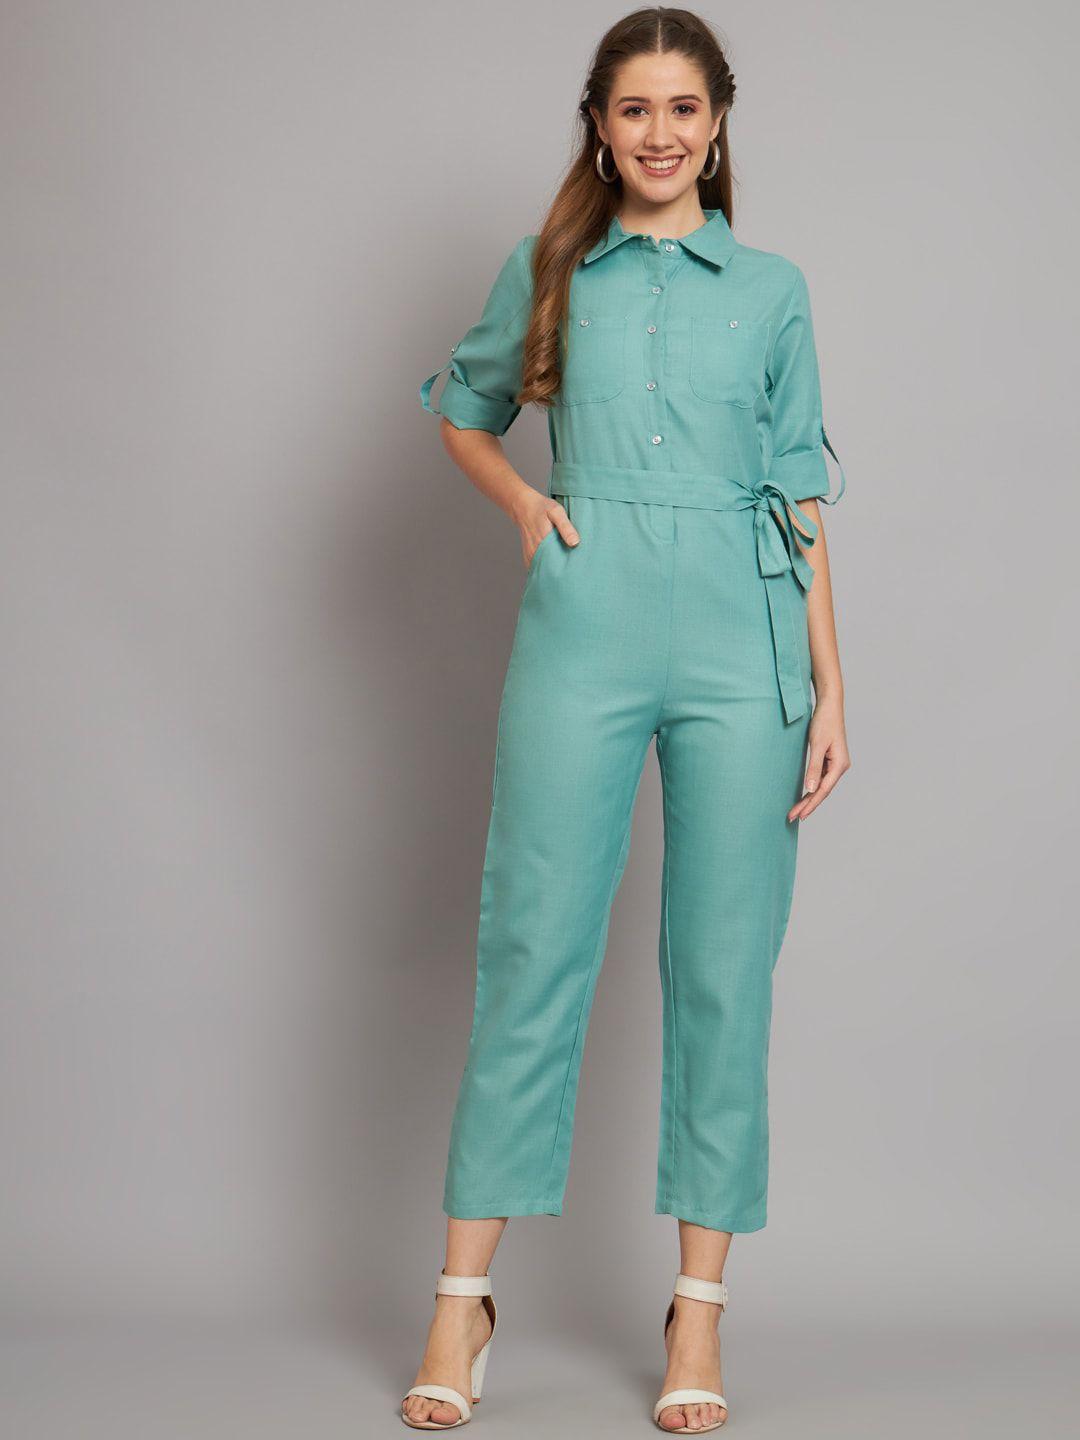 the dry state sea green  waist tie-ups roll-up sleeves shirt collar cotton basic jumpsuit